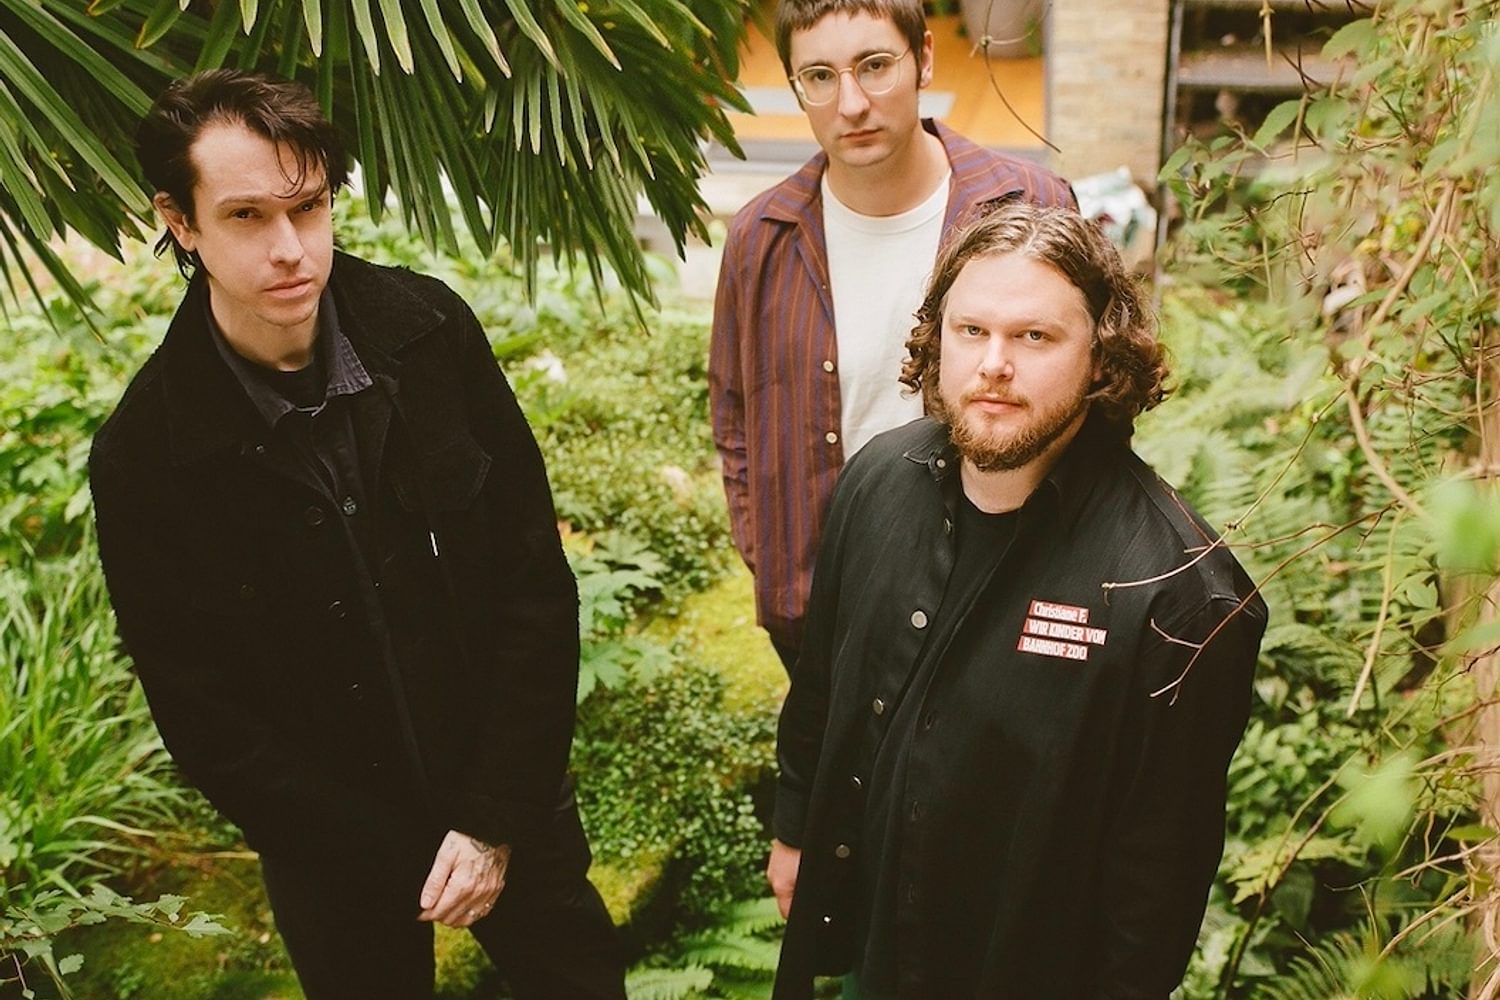 alt-J are releasing new track ‘Hard Drive Gold’ this week